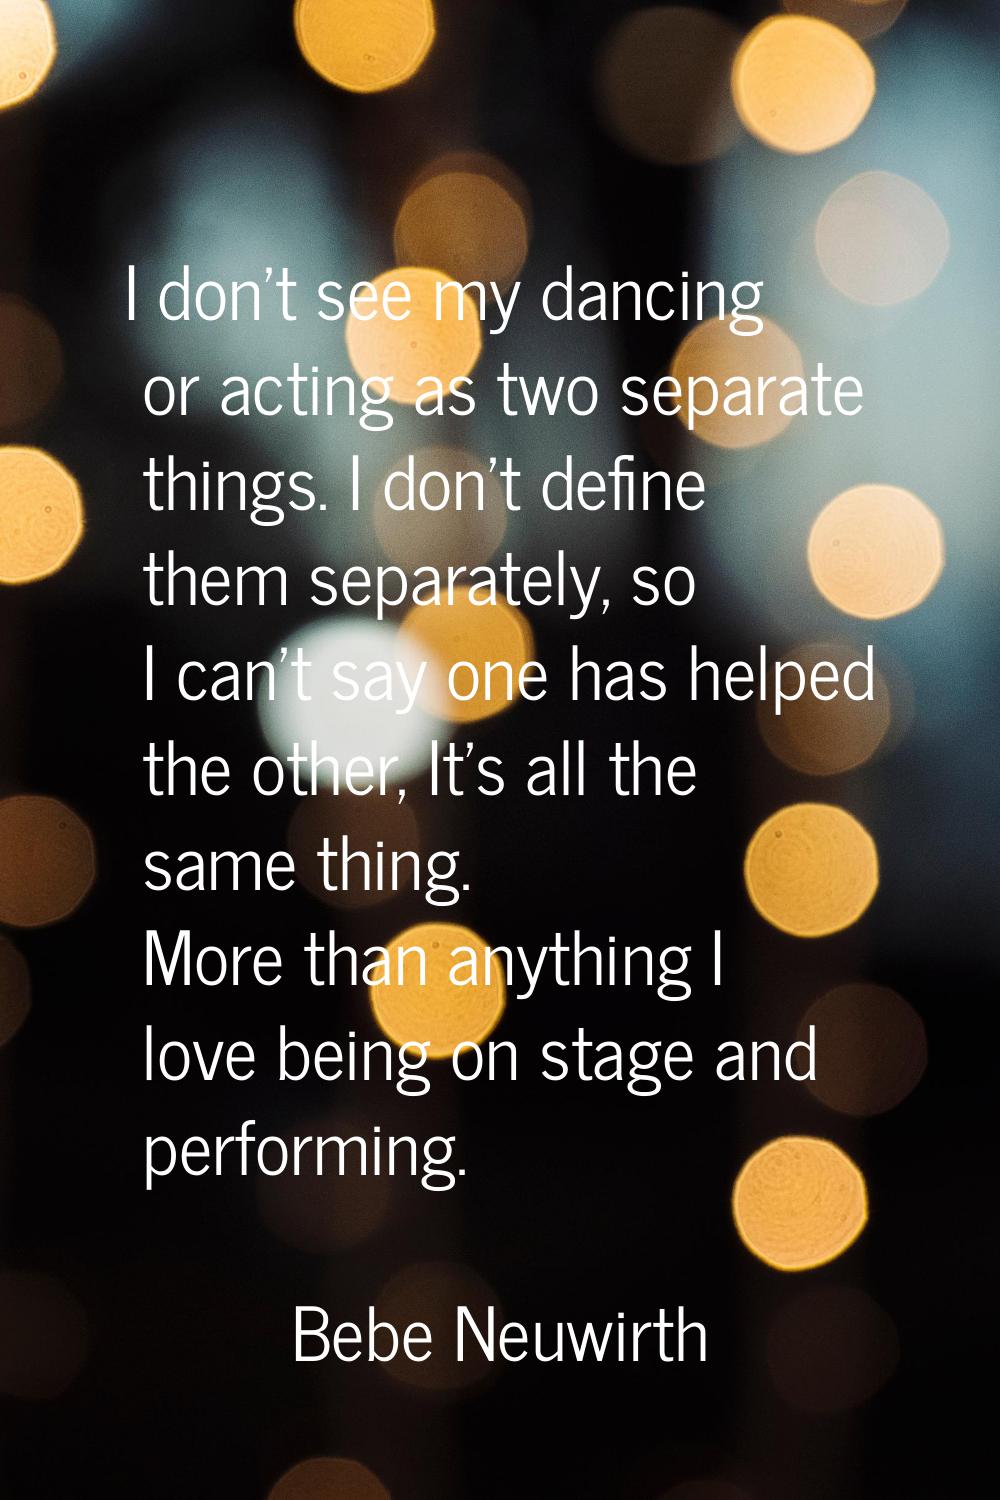 I don't see my dancing or acting as two separate things. I don't define them separately, so I can't